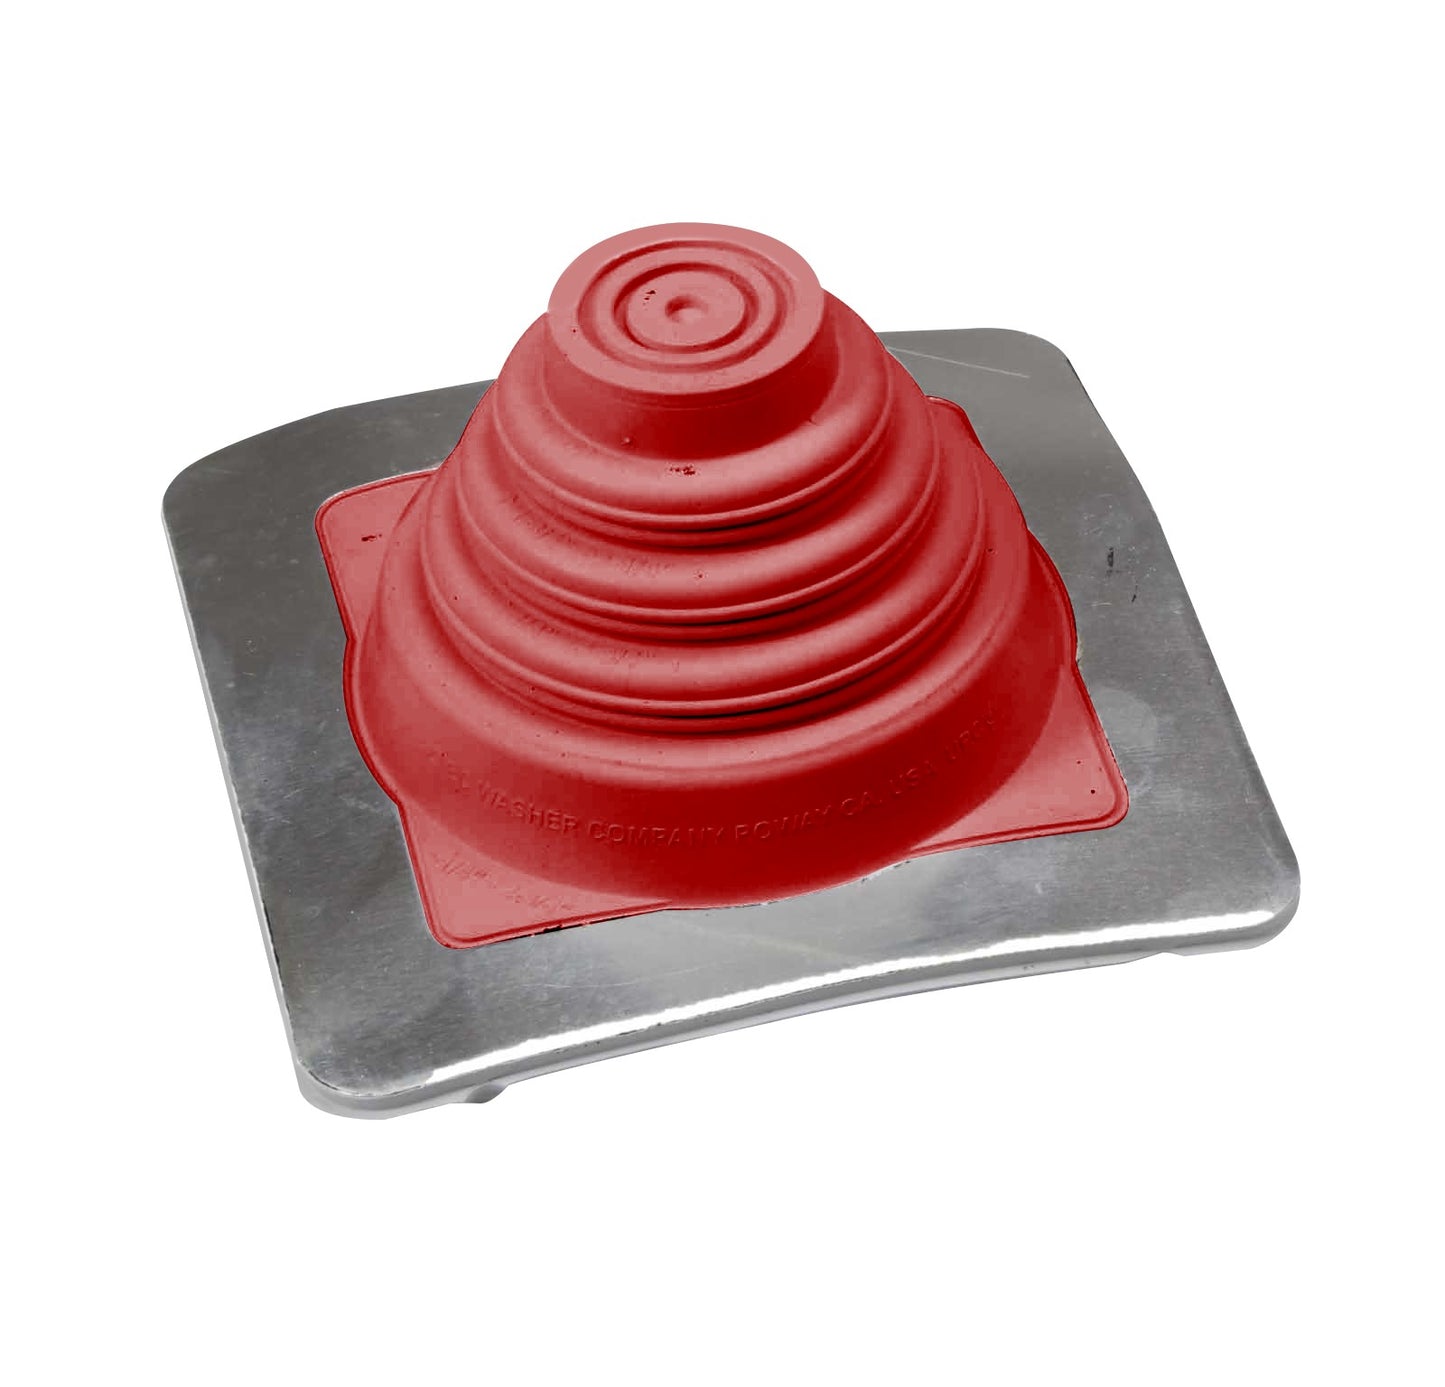 #1 Roofjack Square EPDM Pipe Flashing Boot Bright Red